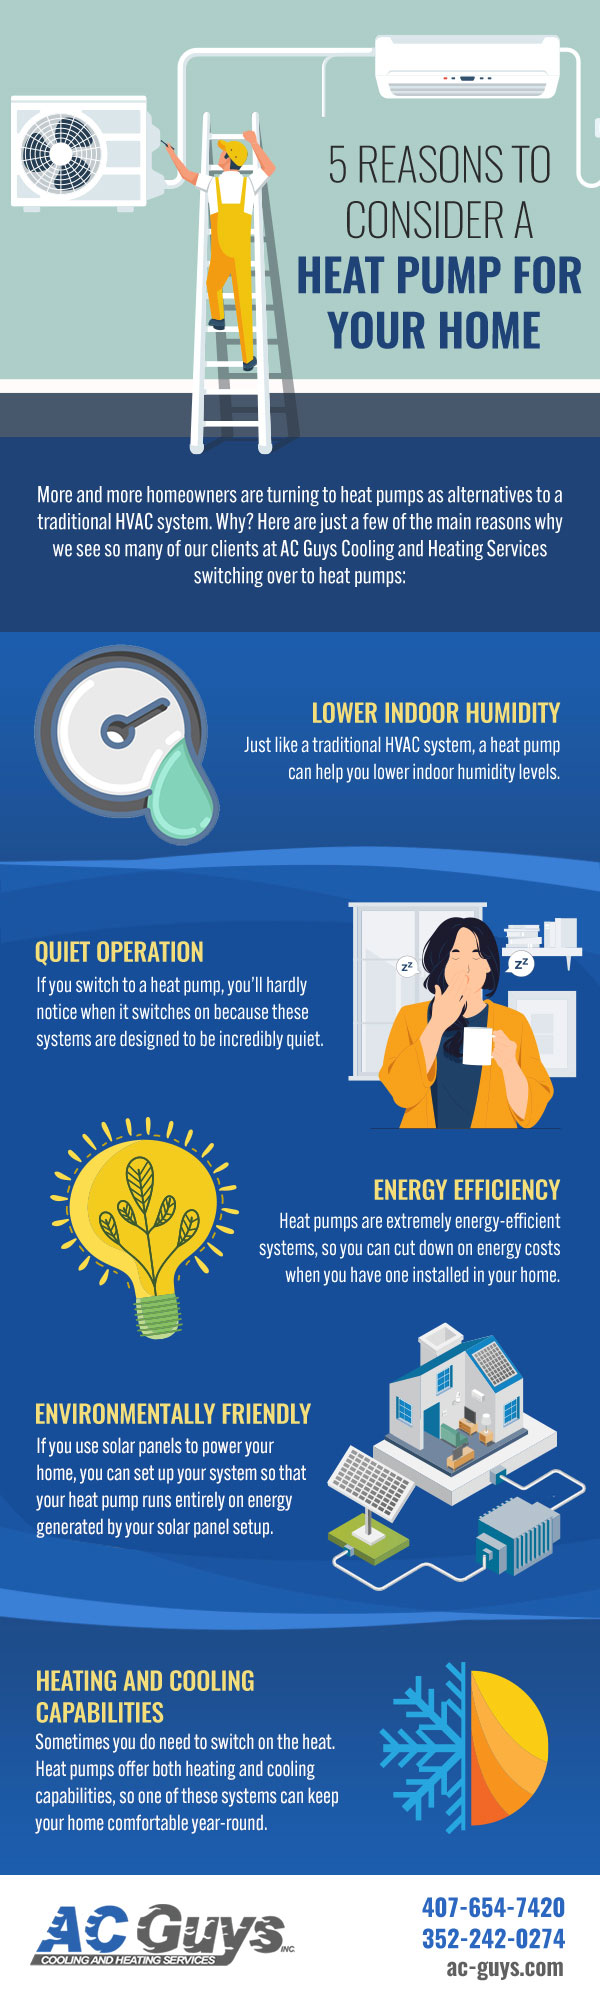 5 Reasons to Consider a Heat Pump for Your Home